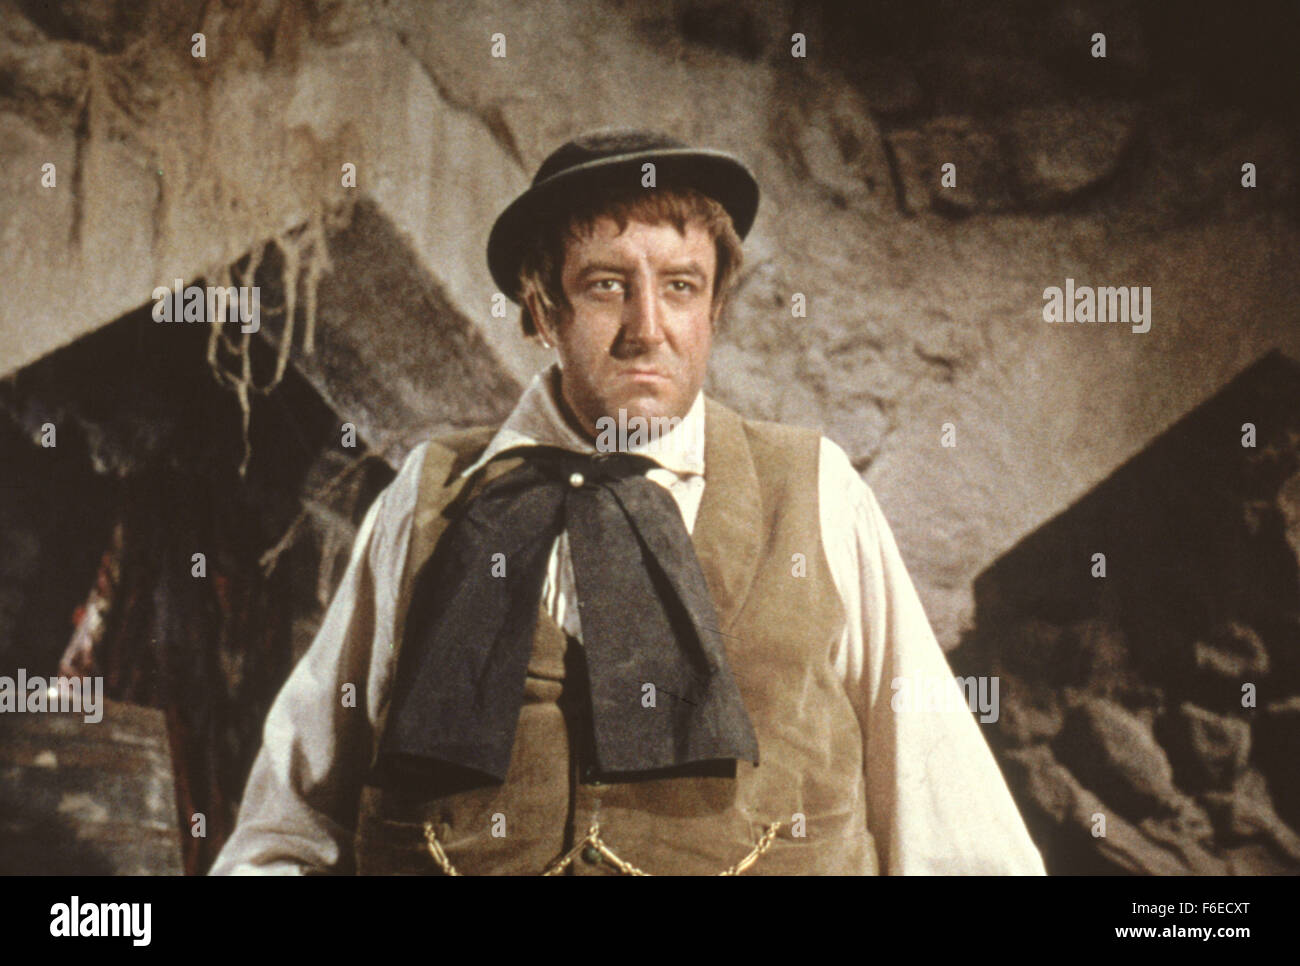 RELEASE DATE: December 22, 1958. MOVIE TITLE: Tom Thumb. STUDIO: Galaxy Pictures Limited. PLOT: . PICTURED: PETER SELLERS as Antony. Stock Photo